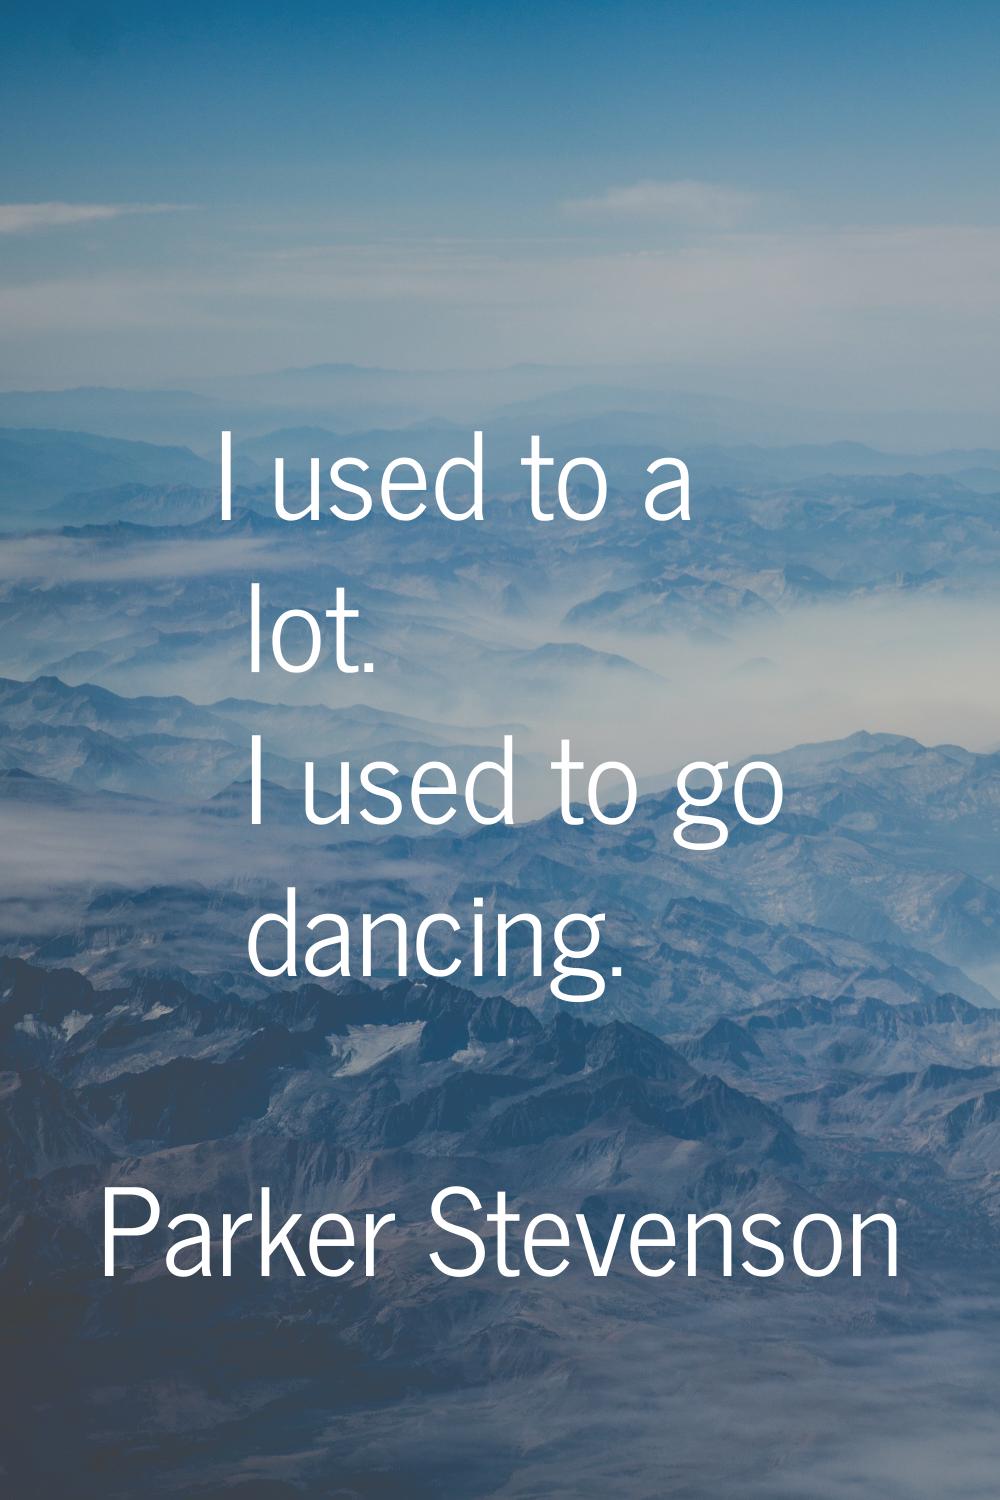 I used to a lot. I used to go dancing.